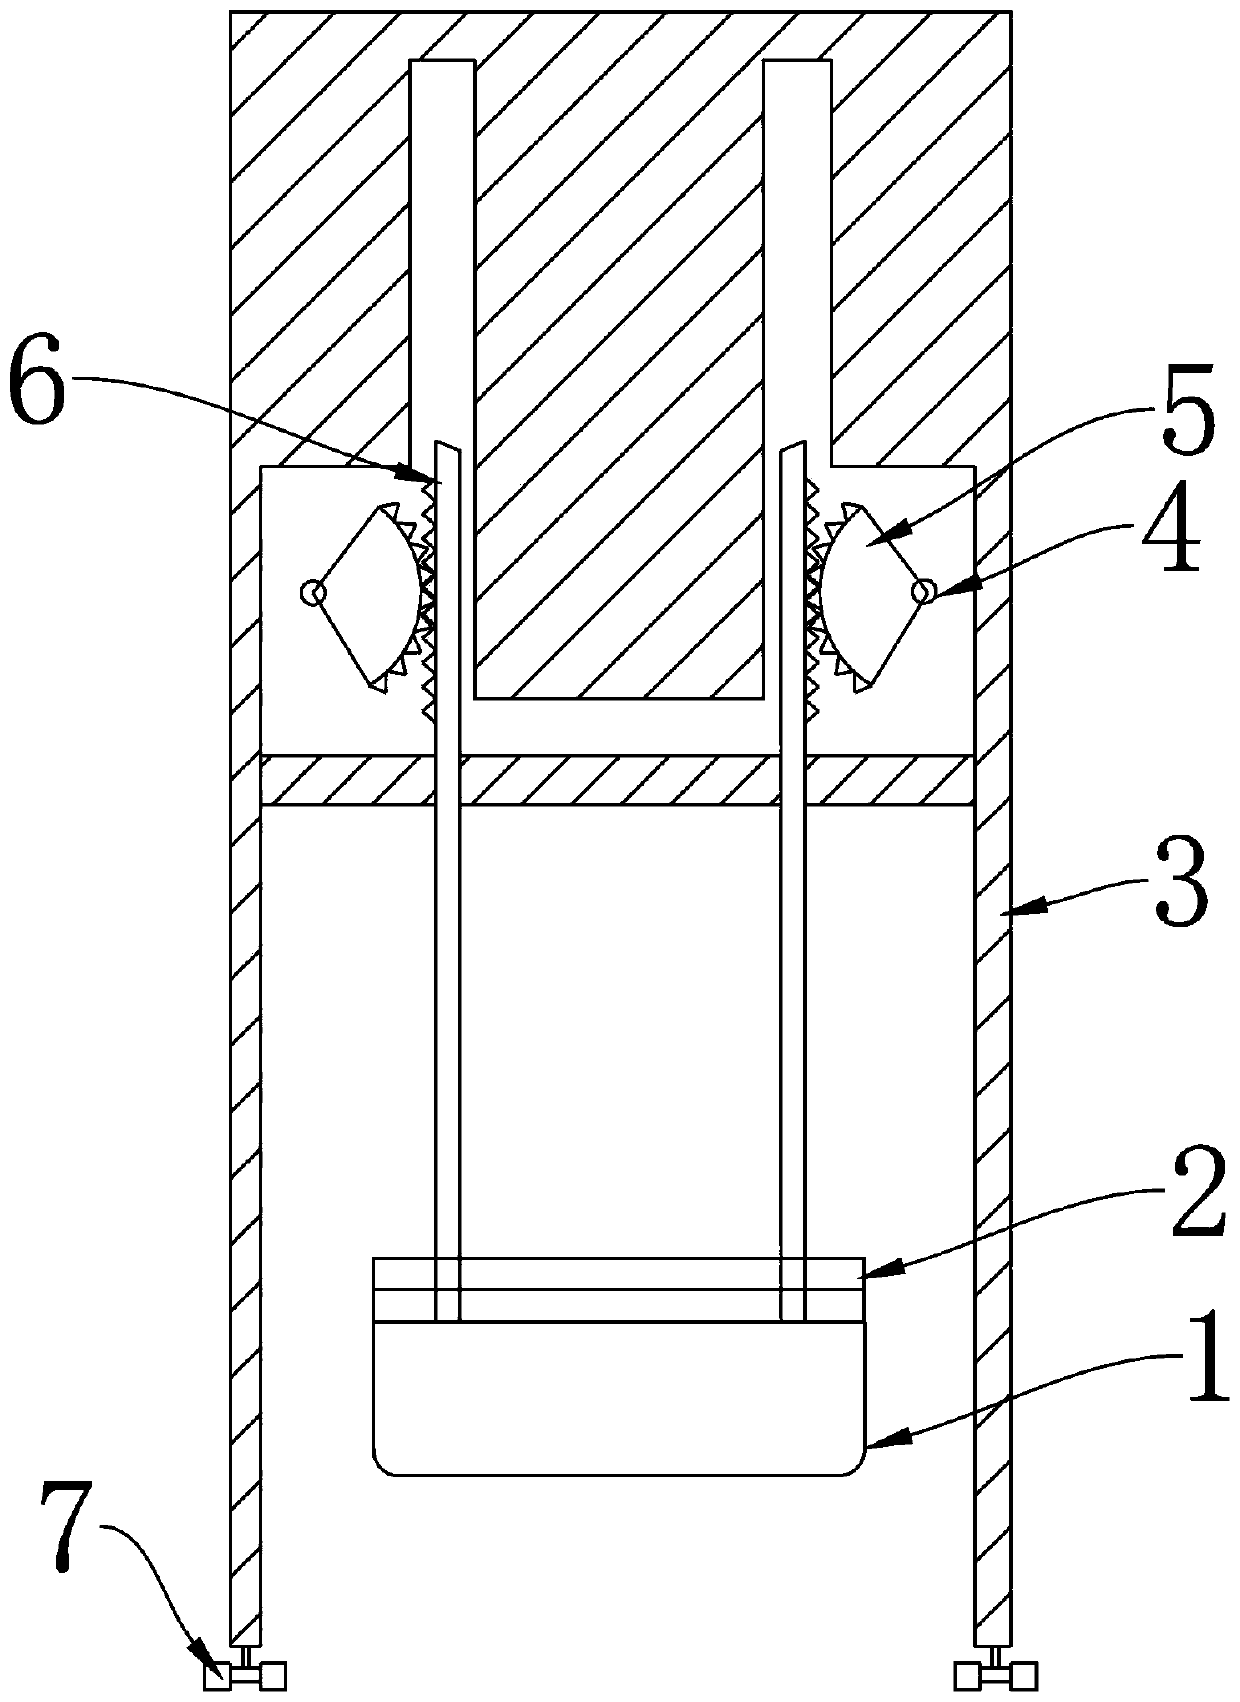 Foundation tamping device for fabricated building construction